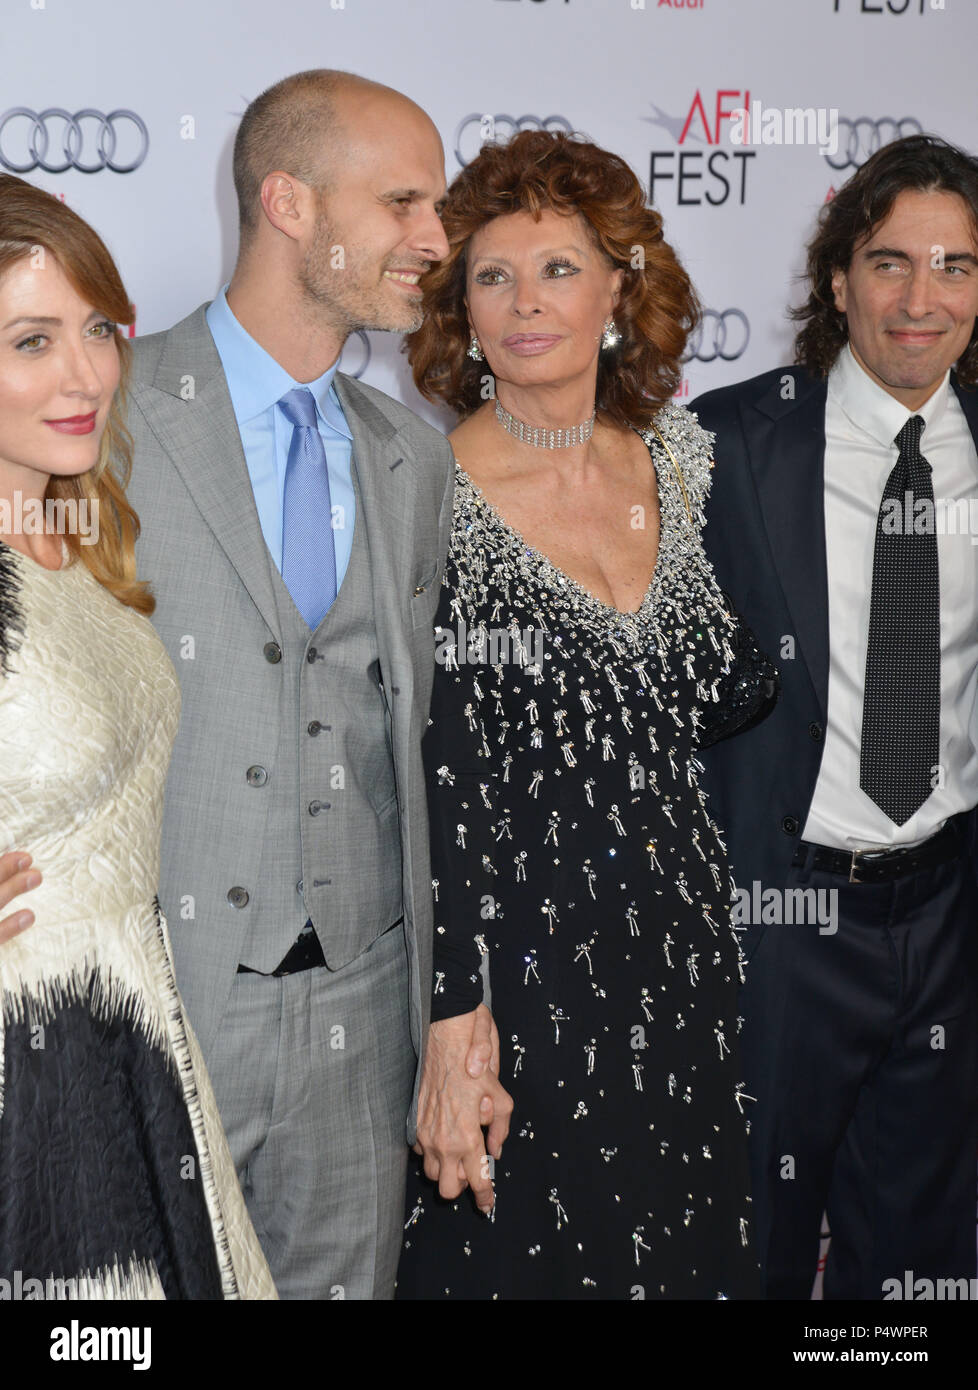 Sophia Loren, Son Carlo Ponti Jr., son Edoardo Ponti, Wife Sasha Alexander at the   Tribute to Sofia Loren, Still Alice, Mommy Premiere at the Dolby Theatre, Nov. 12, 2014, in Los Angeles, Sophia Loren, Son Carlo Ponti Jr., son Edoardo Ponti, Wife Sasha Alexander ------------- Red Carpet Event, Vertical, USA, Film Industry, Celebrities,  Photography, Bestof, Arts Culture and Entertainment, Topix Celebrities fashion /  Vertical, Best of, Event in Hollywood Life - California,  Red Carpet and backstage, USA, Film Industry, Celebrities,  movie celebrities, TV celebrities, Music celebrities, Photog Stock Photo